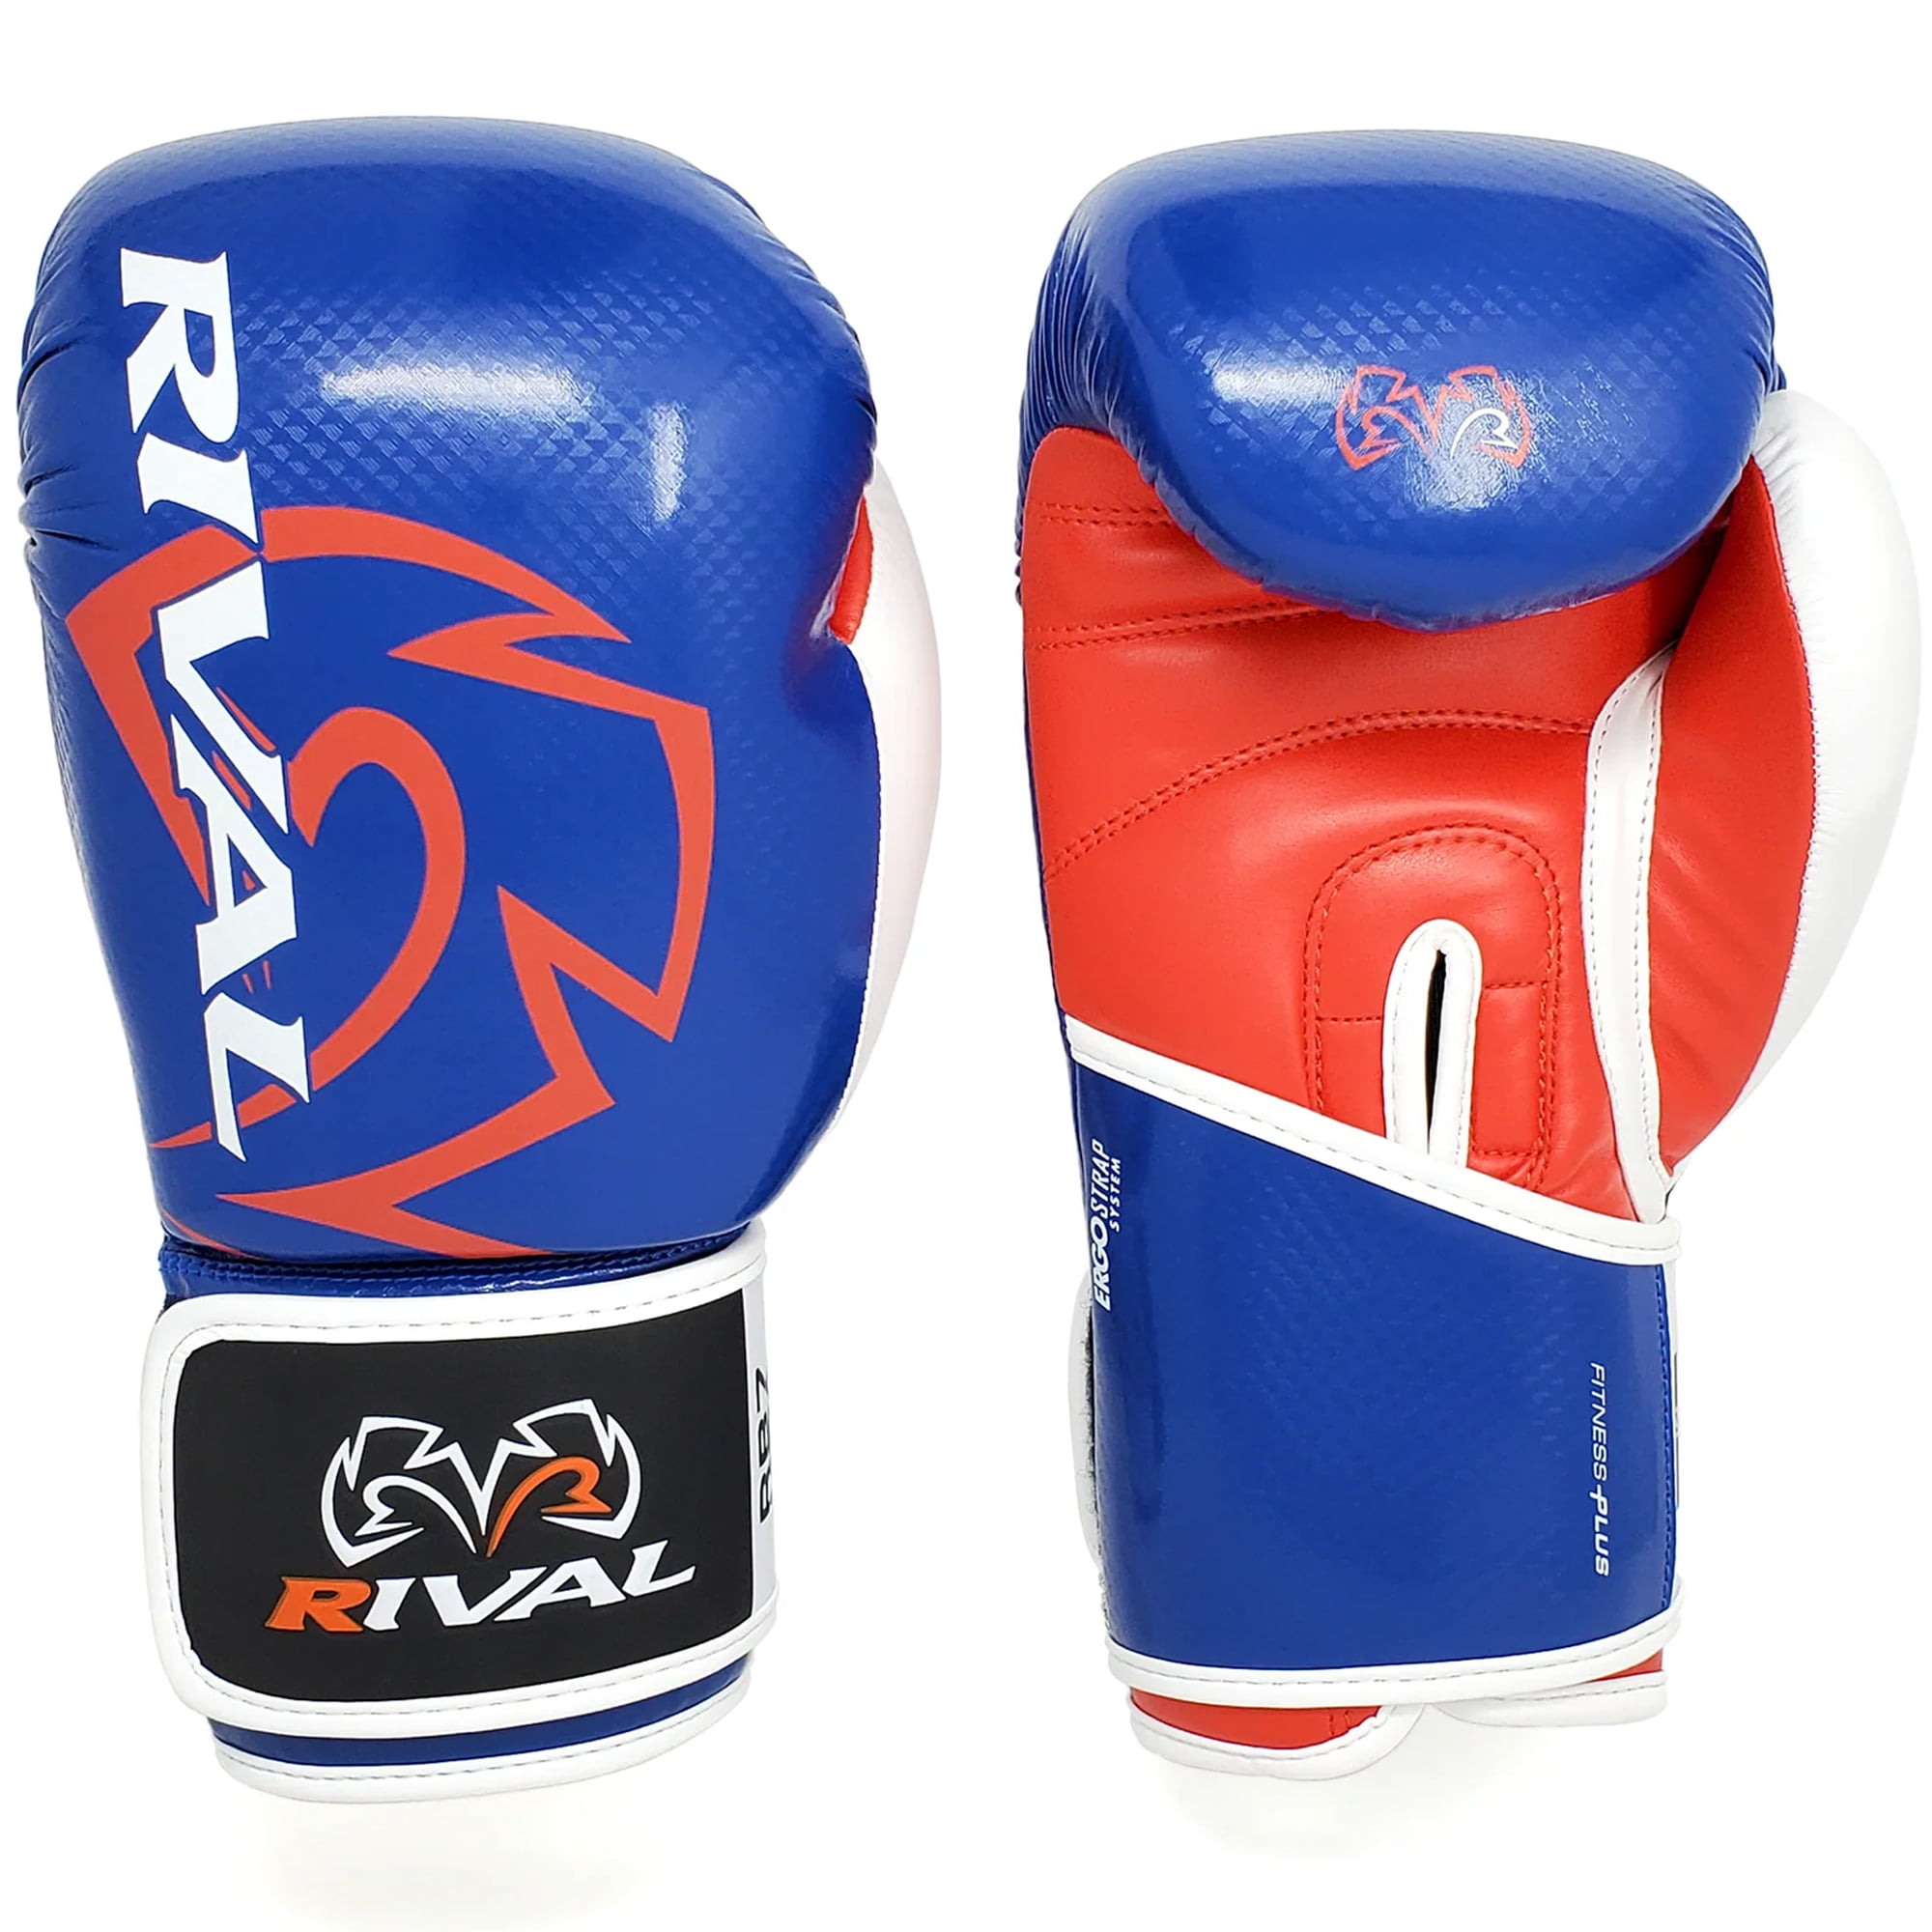 Guantes Box Rival Fitness Rb7 Rd Piel 14 Y 16 Oz Fpx